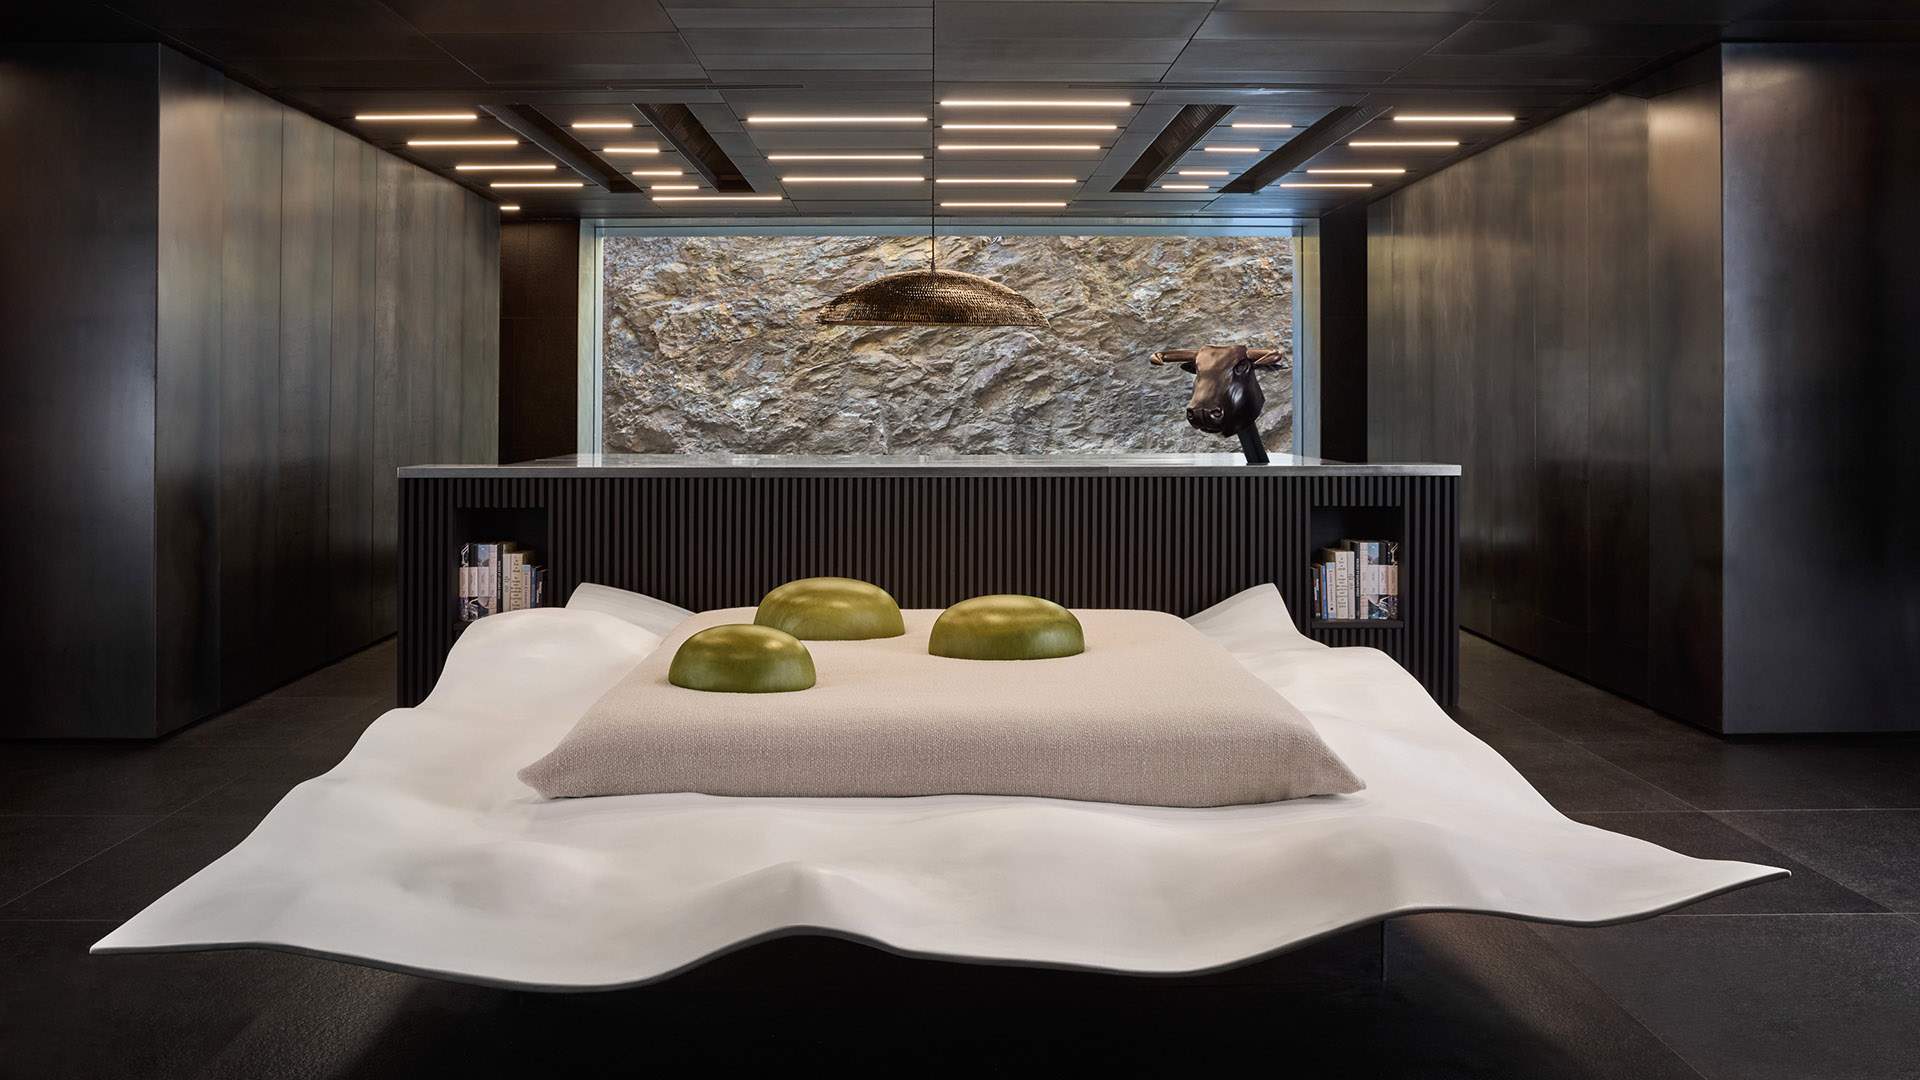 Acclaimed Spanish Restaurant-Turned-Museum El Bulli Is Becoming an Airbnb for One Night Only